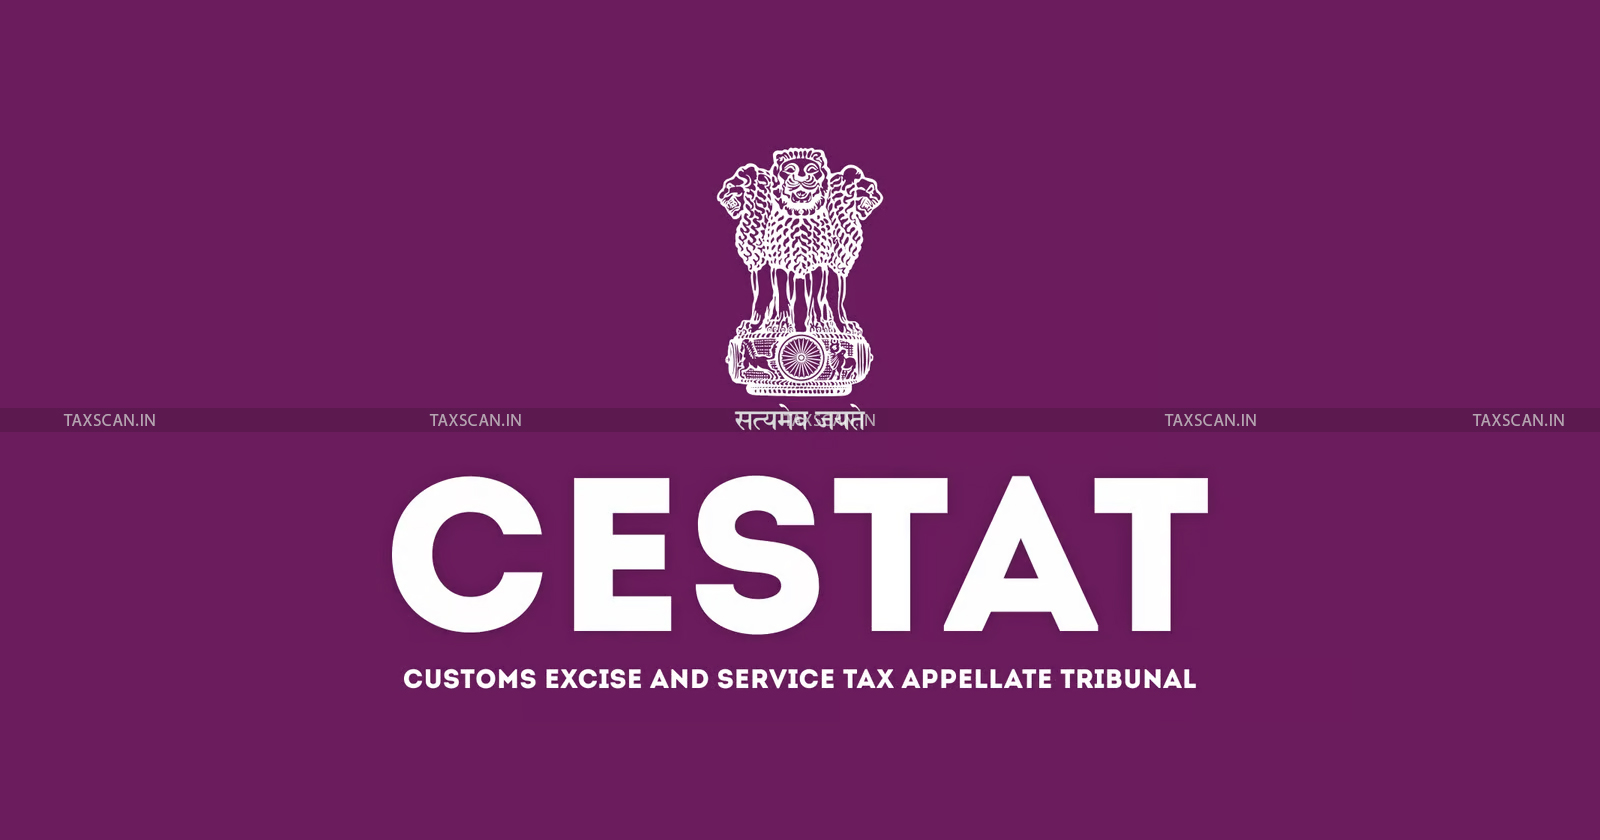 Statutory - IDCO are taxable - heads Real Estate Agent’s- Service-, Consulting Engineer- Service-Technical Testing - Analysis Service-CESTAT-TAXSCAN